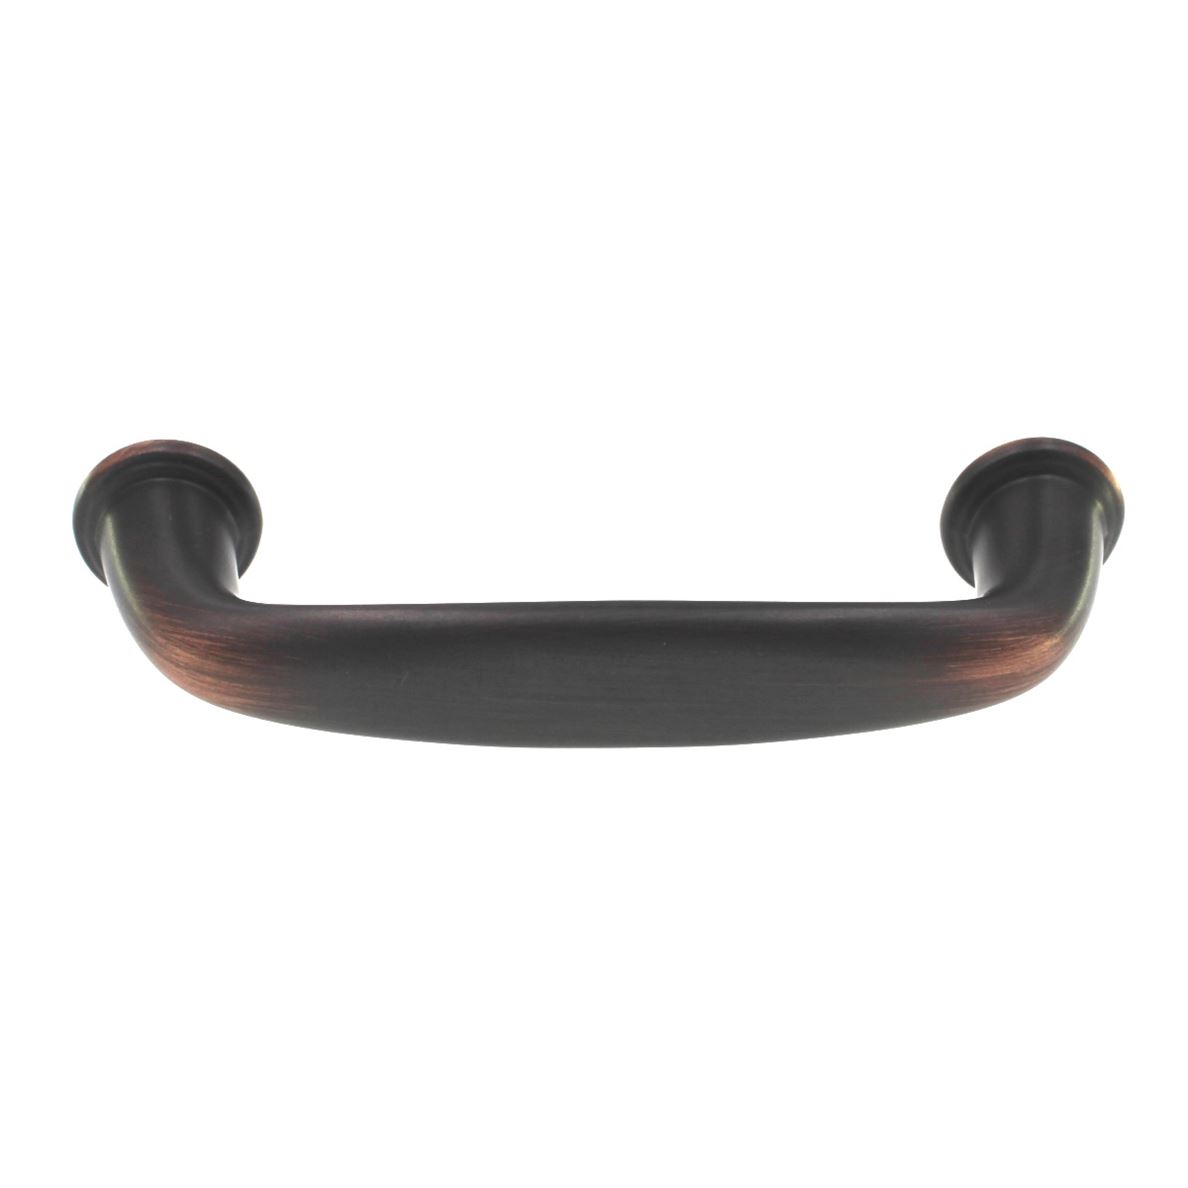 Amerock Kane Oil-Rubbed Bronze 3" Ctr. Cabinet Arch Pull Handle BP53701ORB